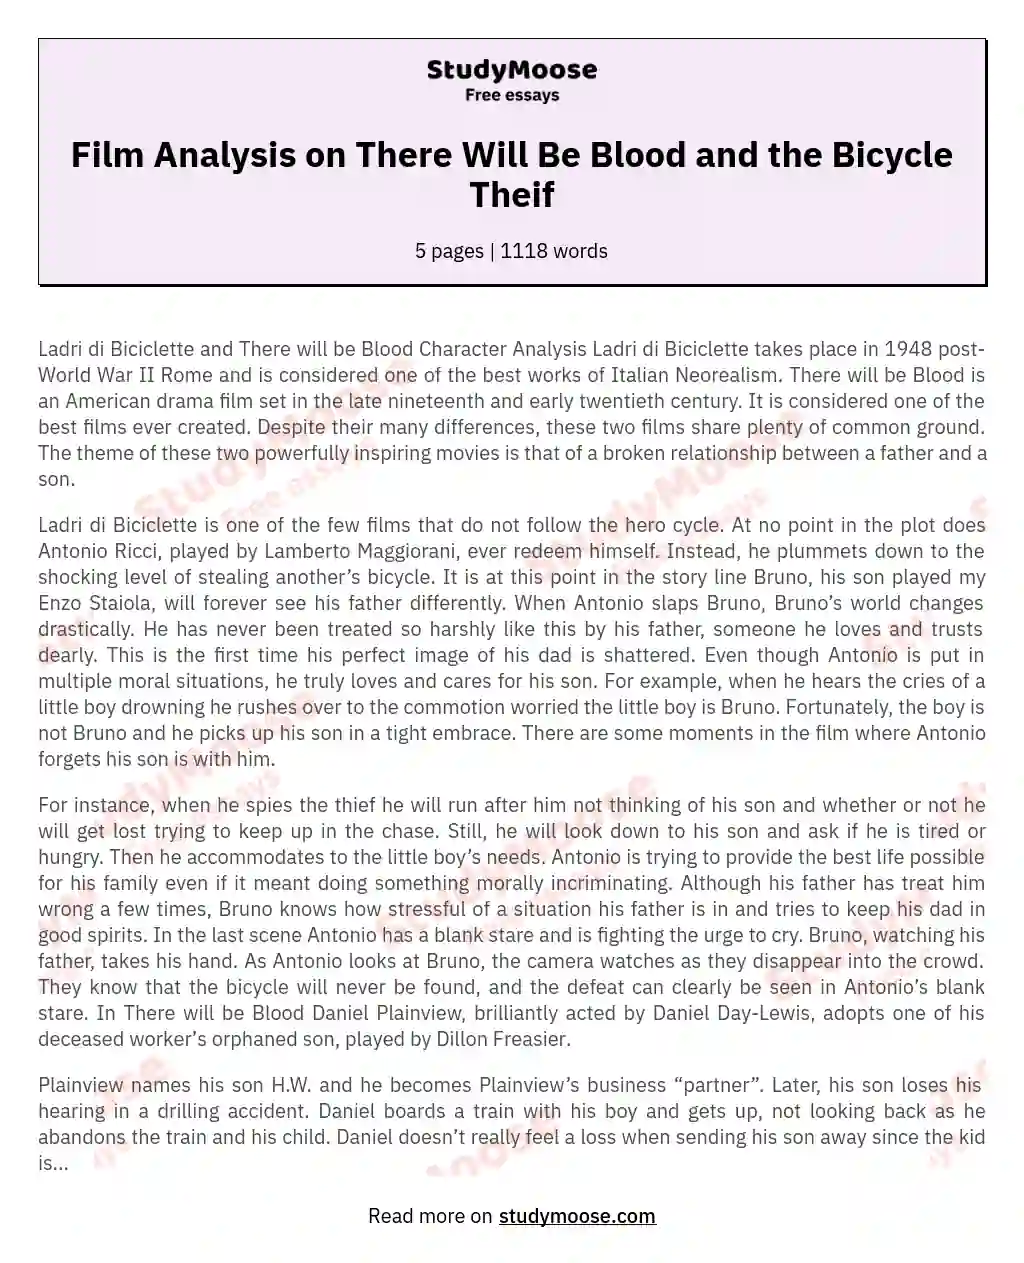 Film Analysis on There Will Be Blood and the Bicycle Theif essay